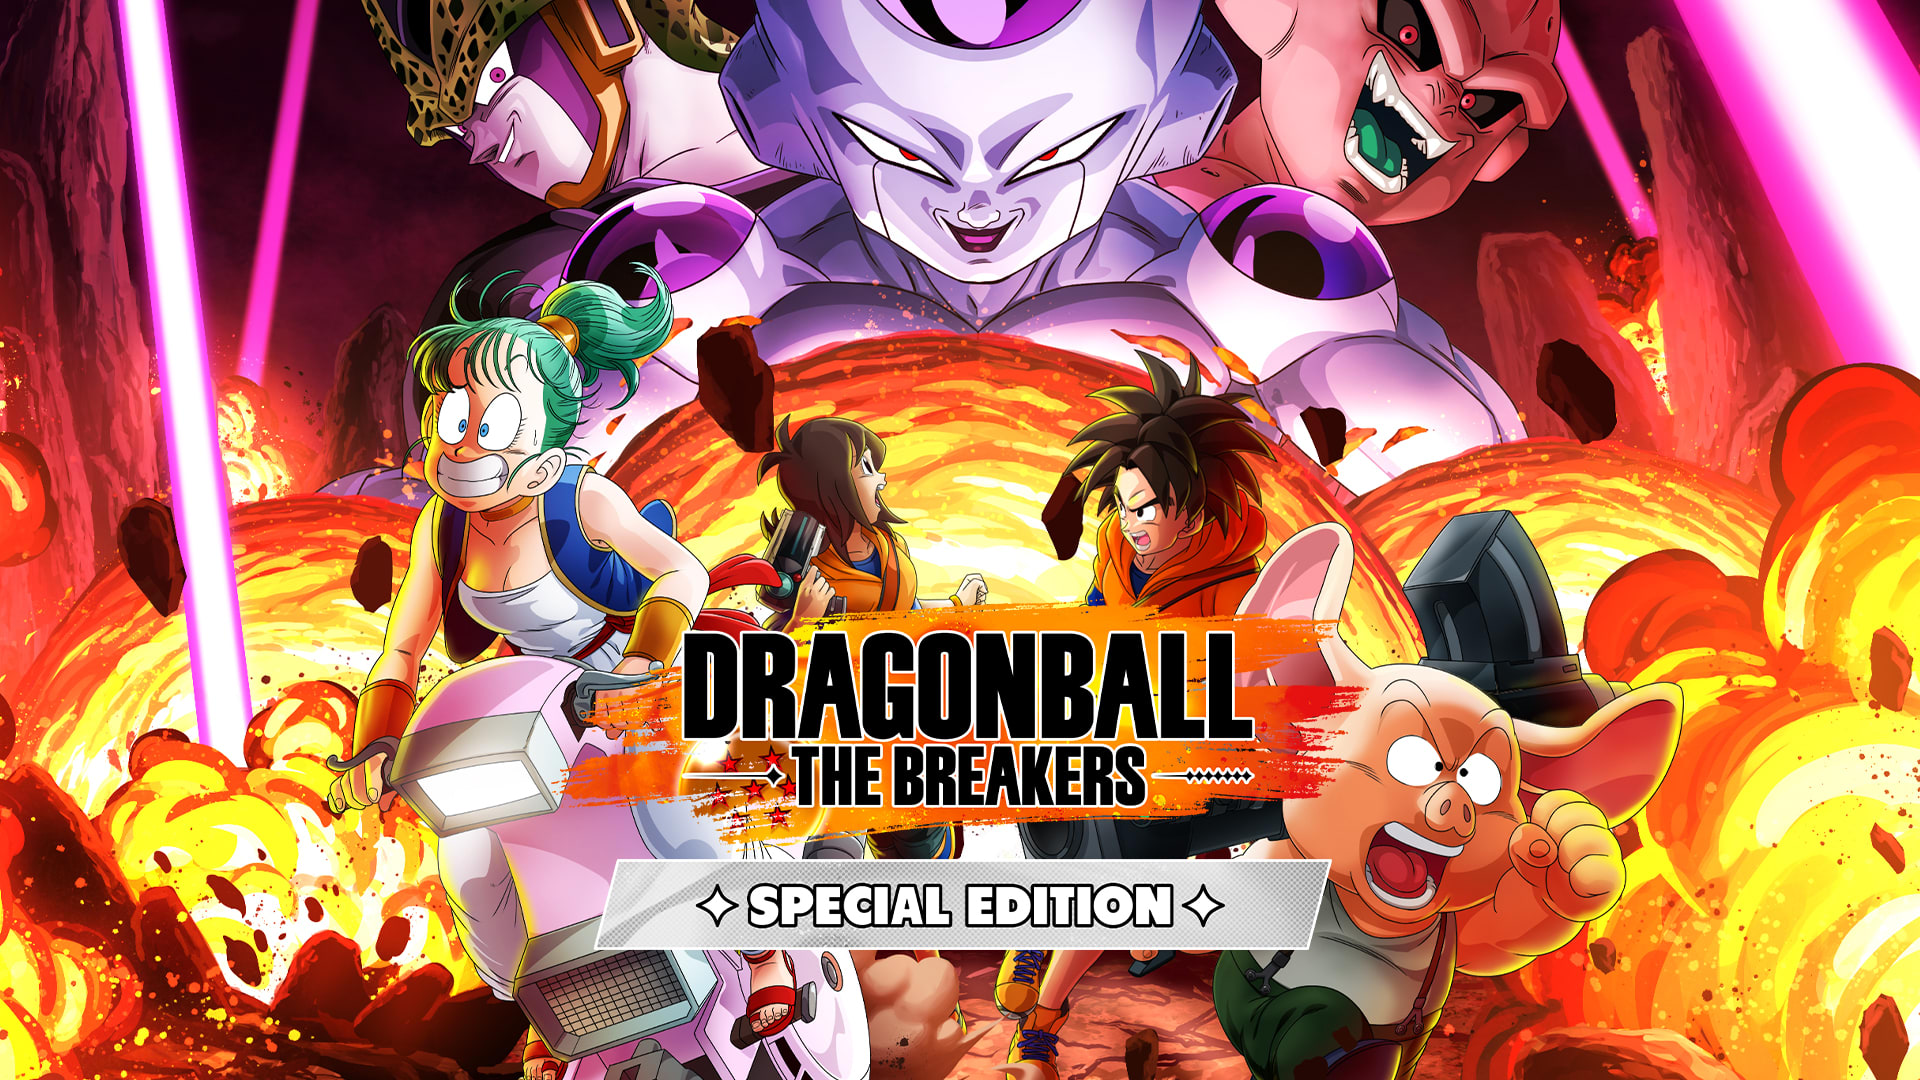 DRAGON BALL: THE BREAKERS - Special Edition 1